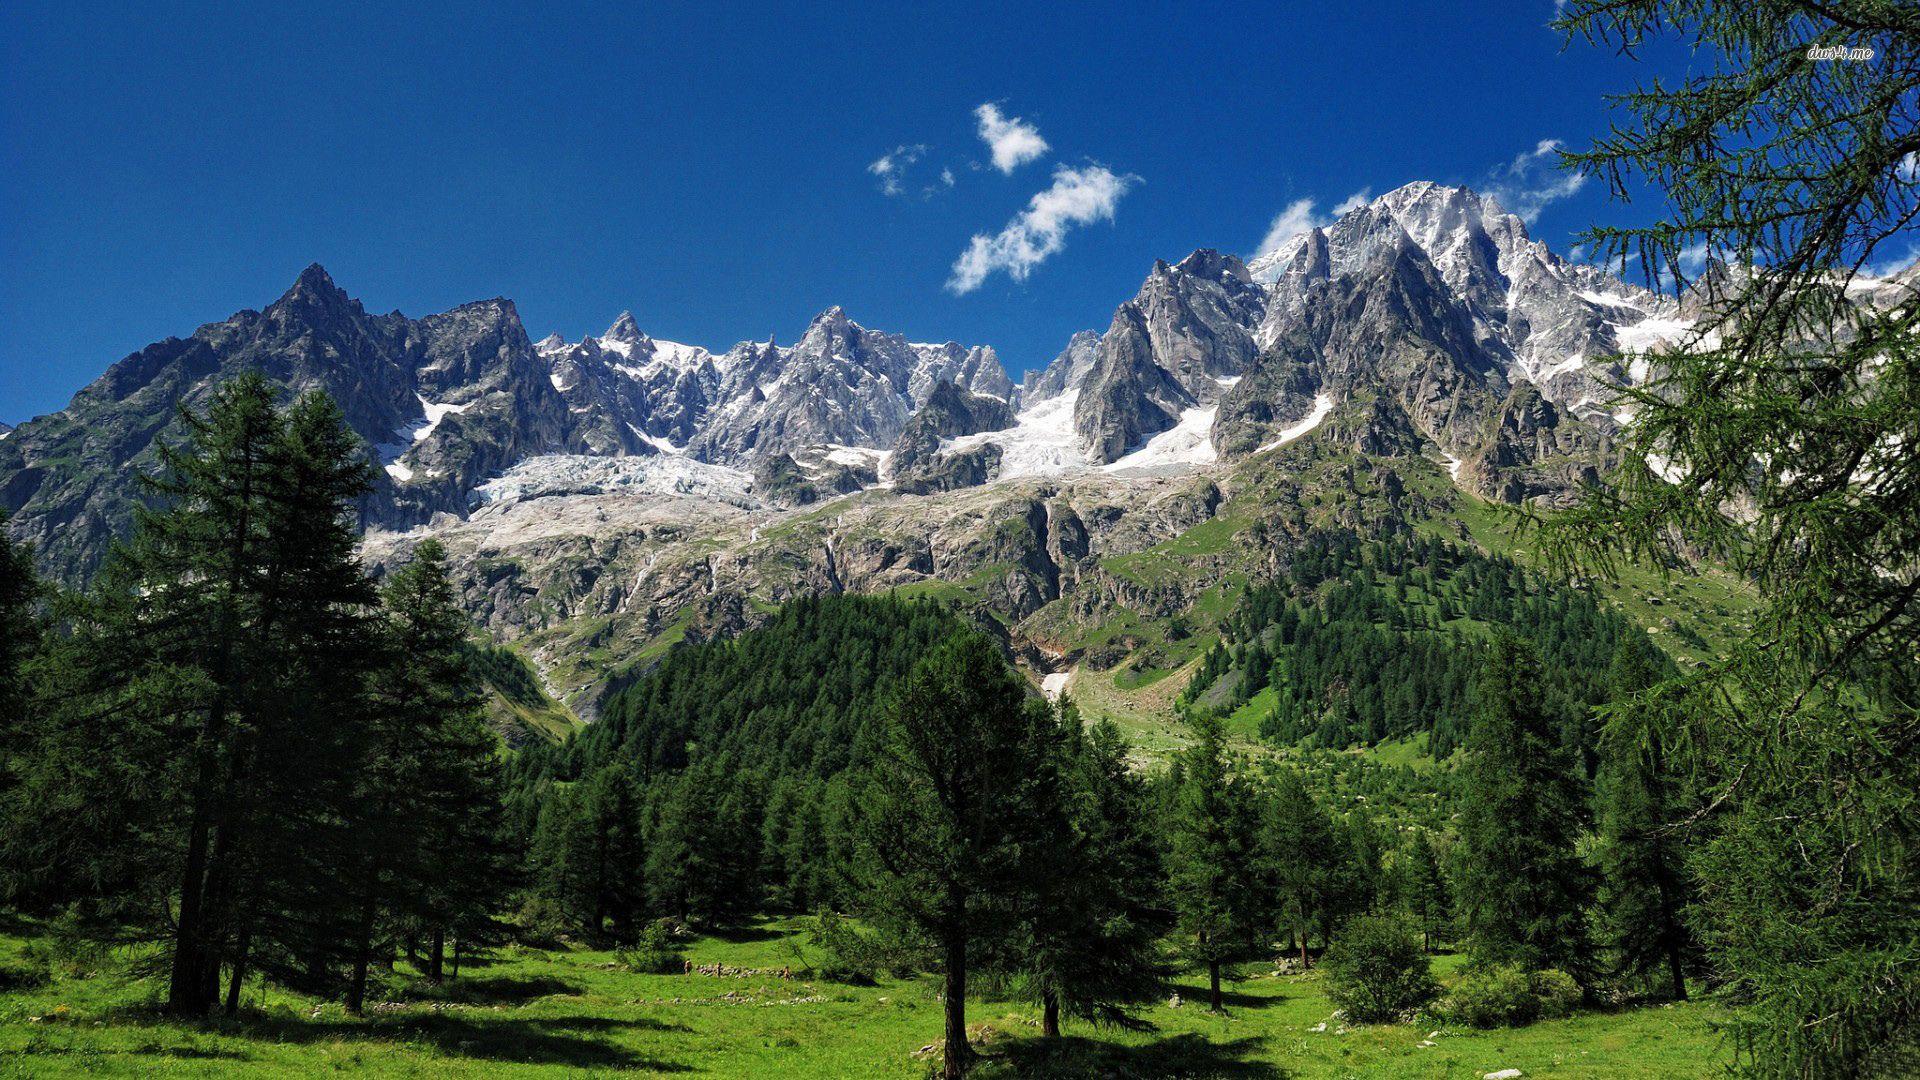  Mont  Blanc Wallpapers  Top Free Mont  Blanc Backgrounds 